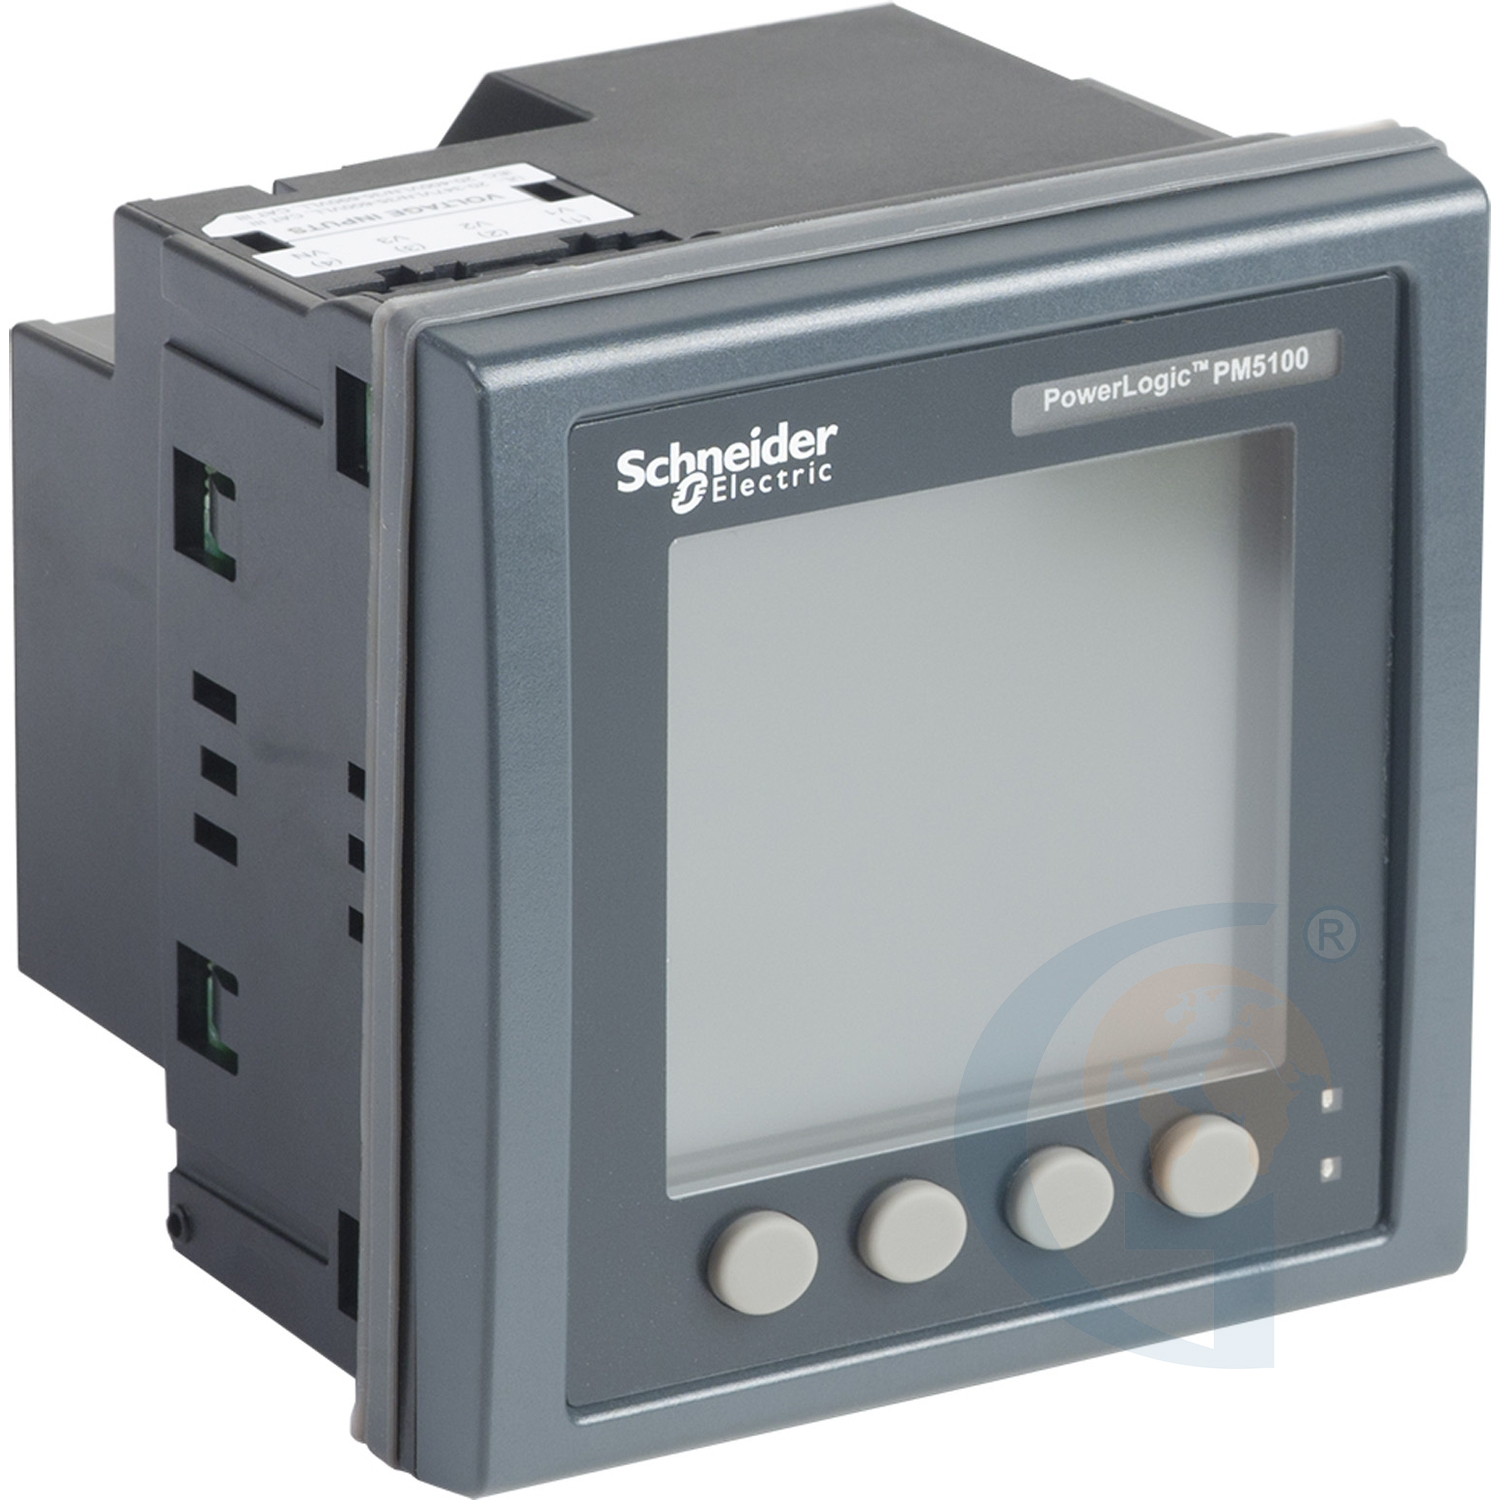 Schneider Electric METSEPM5110 PM5110 Meter, modbus, up to 15th H, 1DO 33 alarms https://gesrepair.com/wp-content/uploads/2020/Schneider/Schneider_Electric_METSEPM5110_.jpg